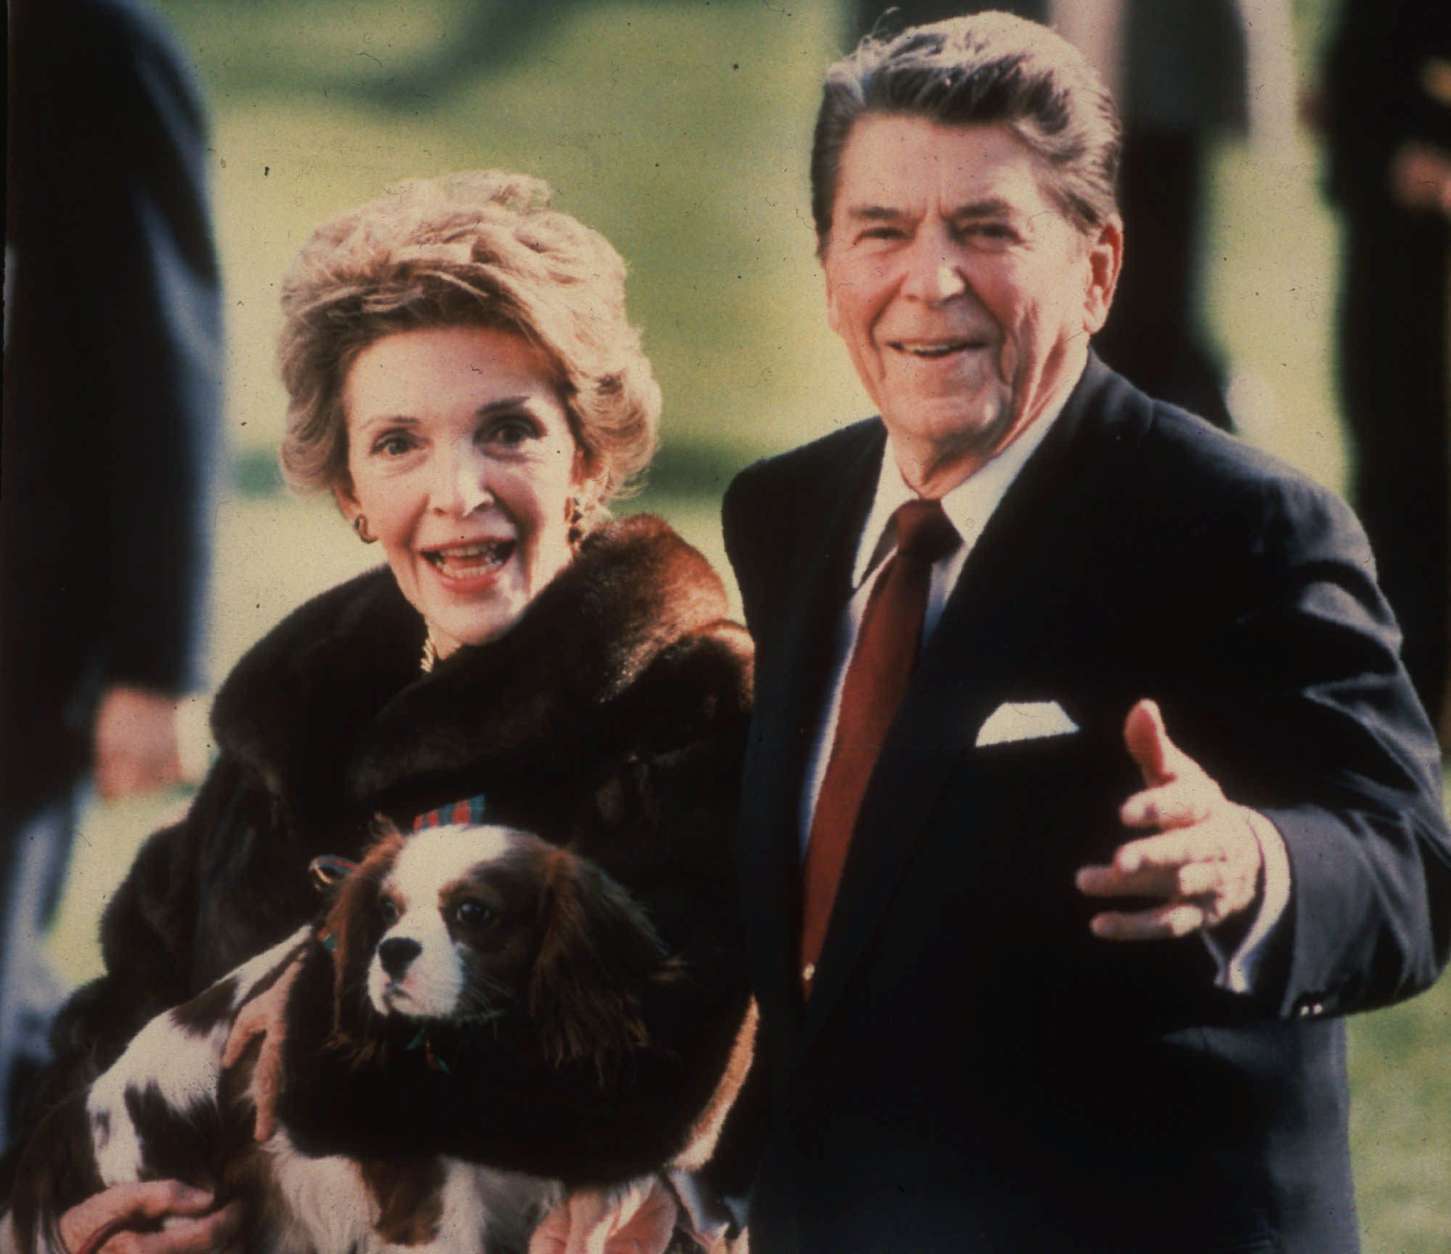 **FILE**   This December 1986 file photo shows first lady Nancy Reagan holding the Reagans' pet Rex, a King Charles spaniel, as she and President Reagan walk on the White House South lawn. (AP Photo/Dennis Cook, FILE)